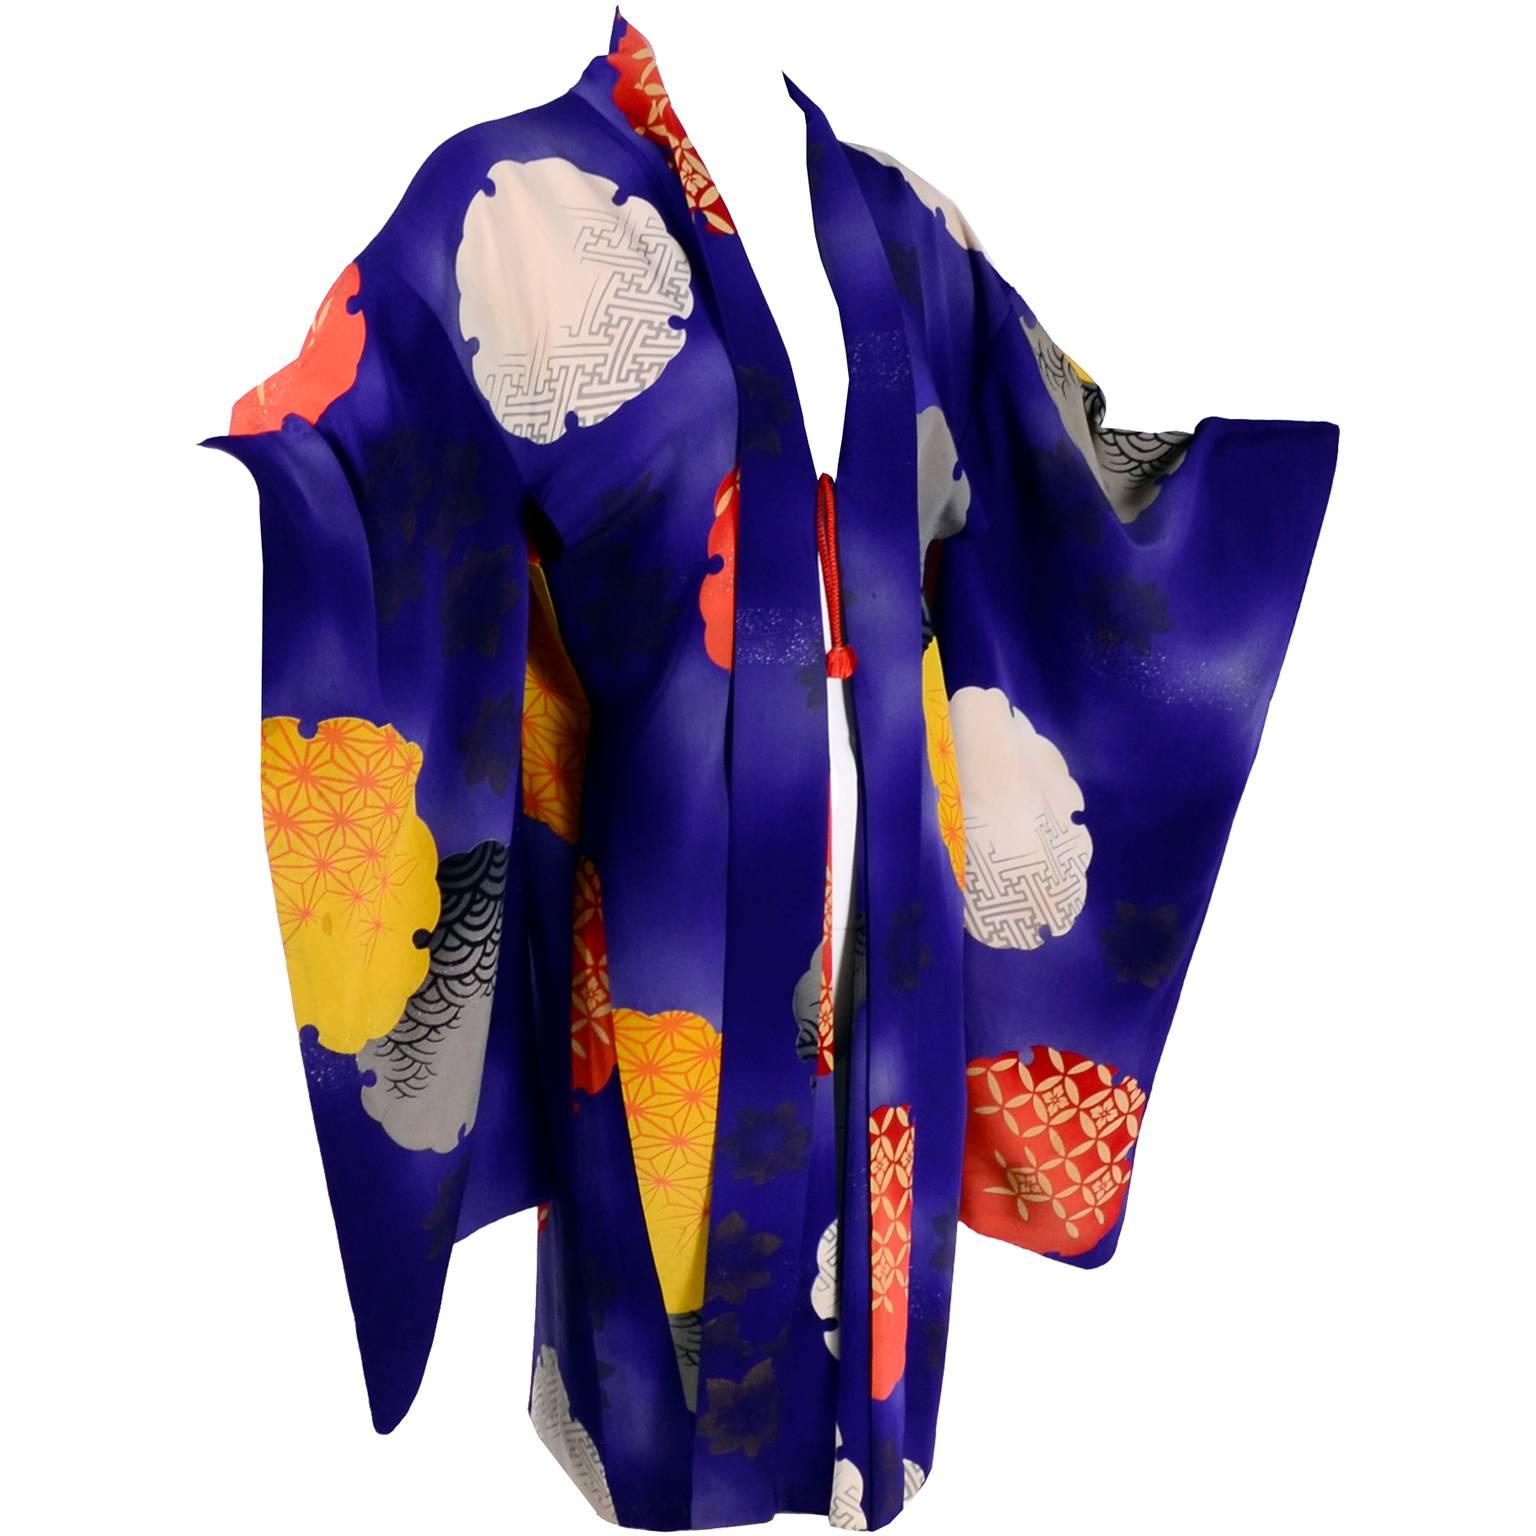 This is a stunning 1930's vintage Haori style Japanese jacket in a lush purple silk with yellow, orange and ivory mon crests.  I've never seen one quite like this one with its bold colors and giant print! This came from an estate of antique and